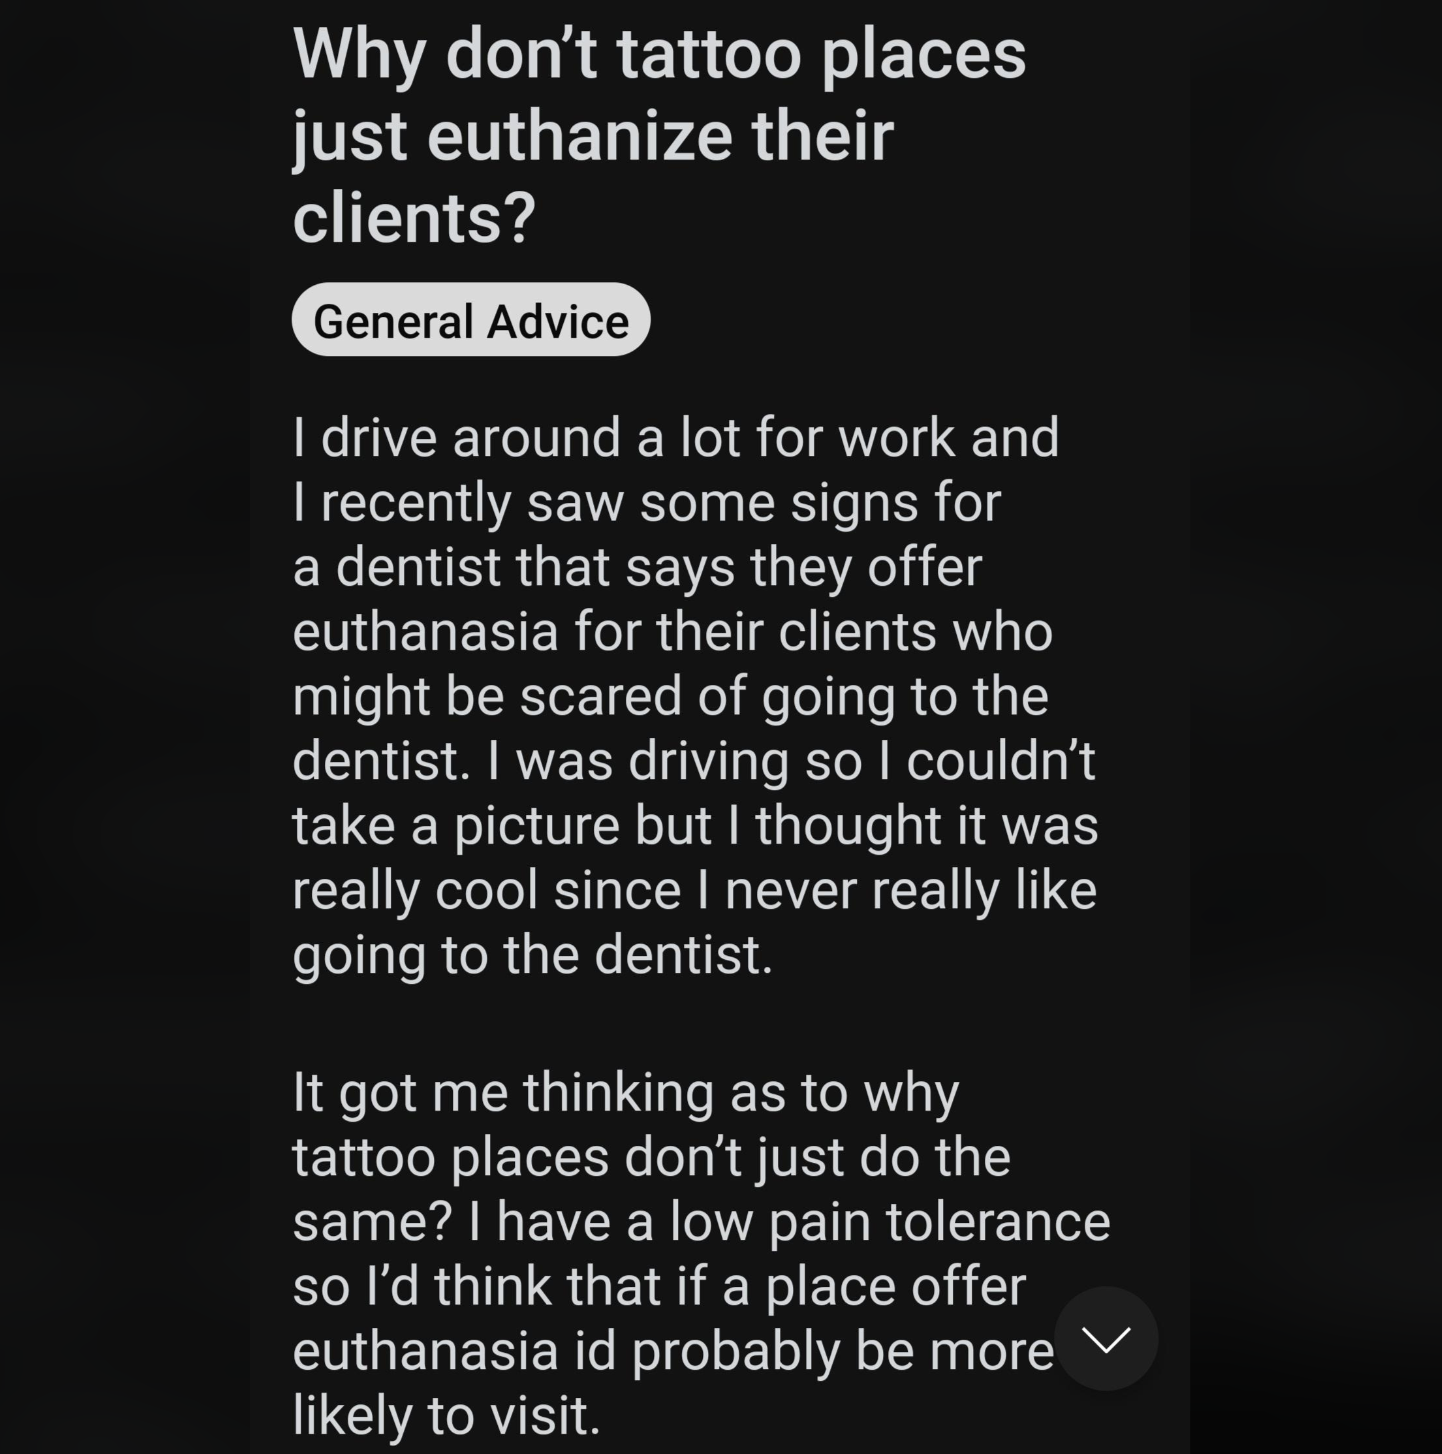 screenshot - Why don't tattoo places just euthanize their clients? General Advice I drive around a lot for work and I recently saw some signs for a dentist that says they offer euthanasia for their clients who might be scared of going to the dentist. I wa